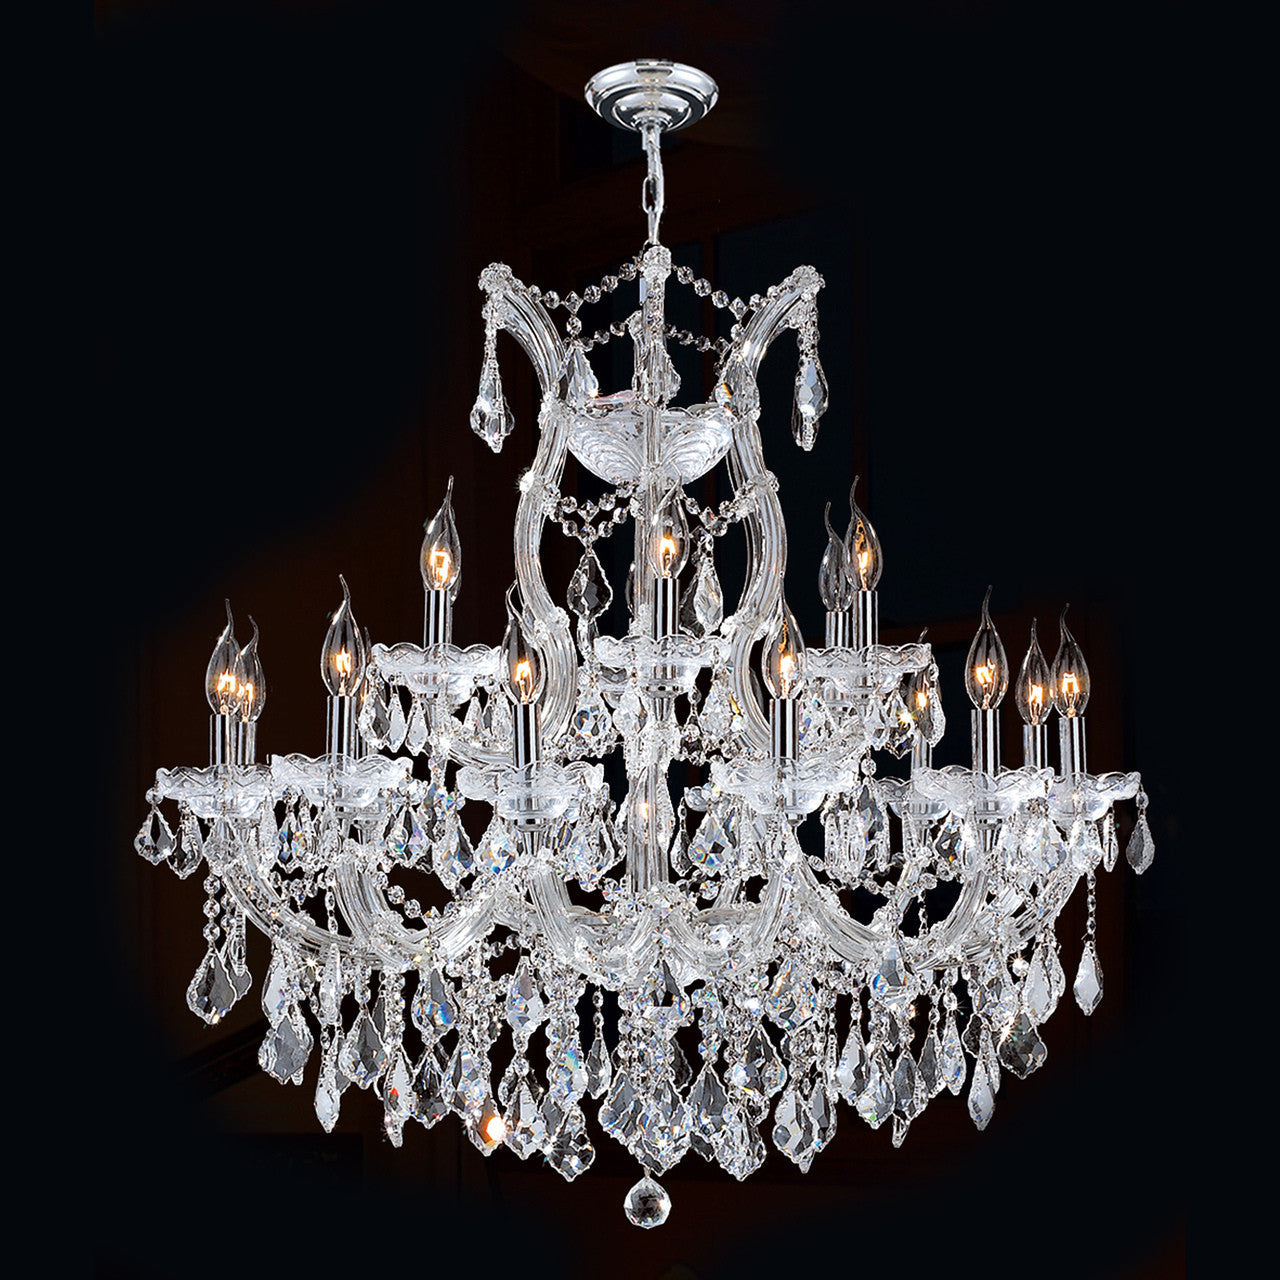 33' Wide Chrome Chandelier 19 Lights Maria Theresa Crystal Chandelier for Dining Room MT01L19C